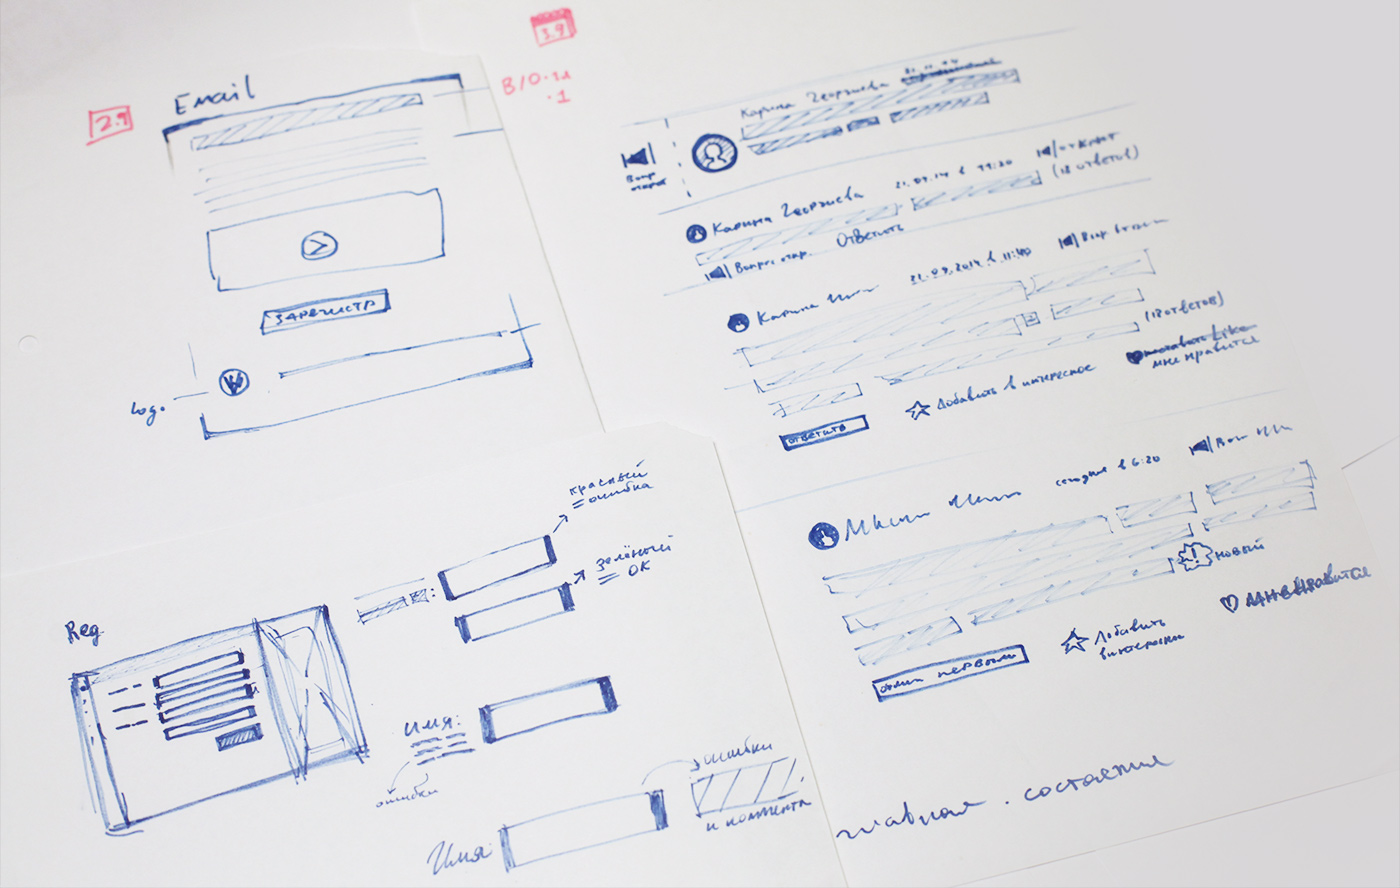 Mockups and designing thought process